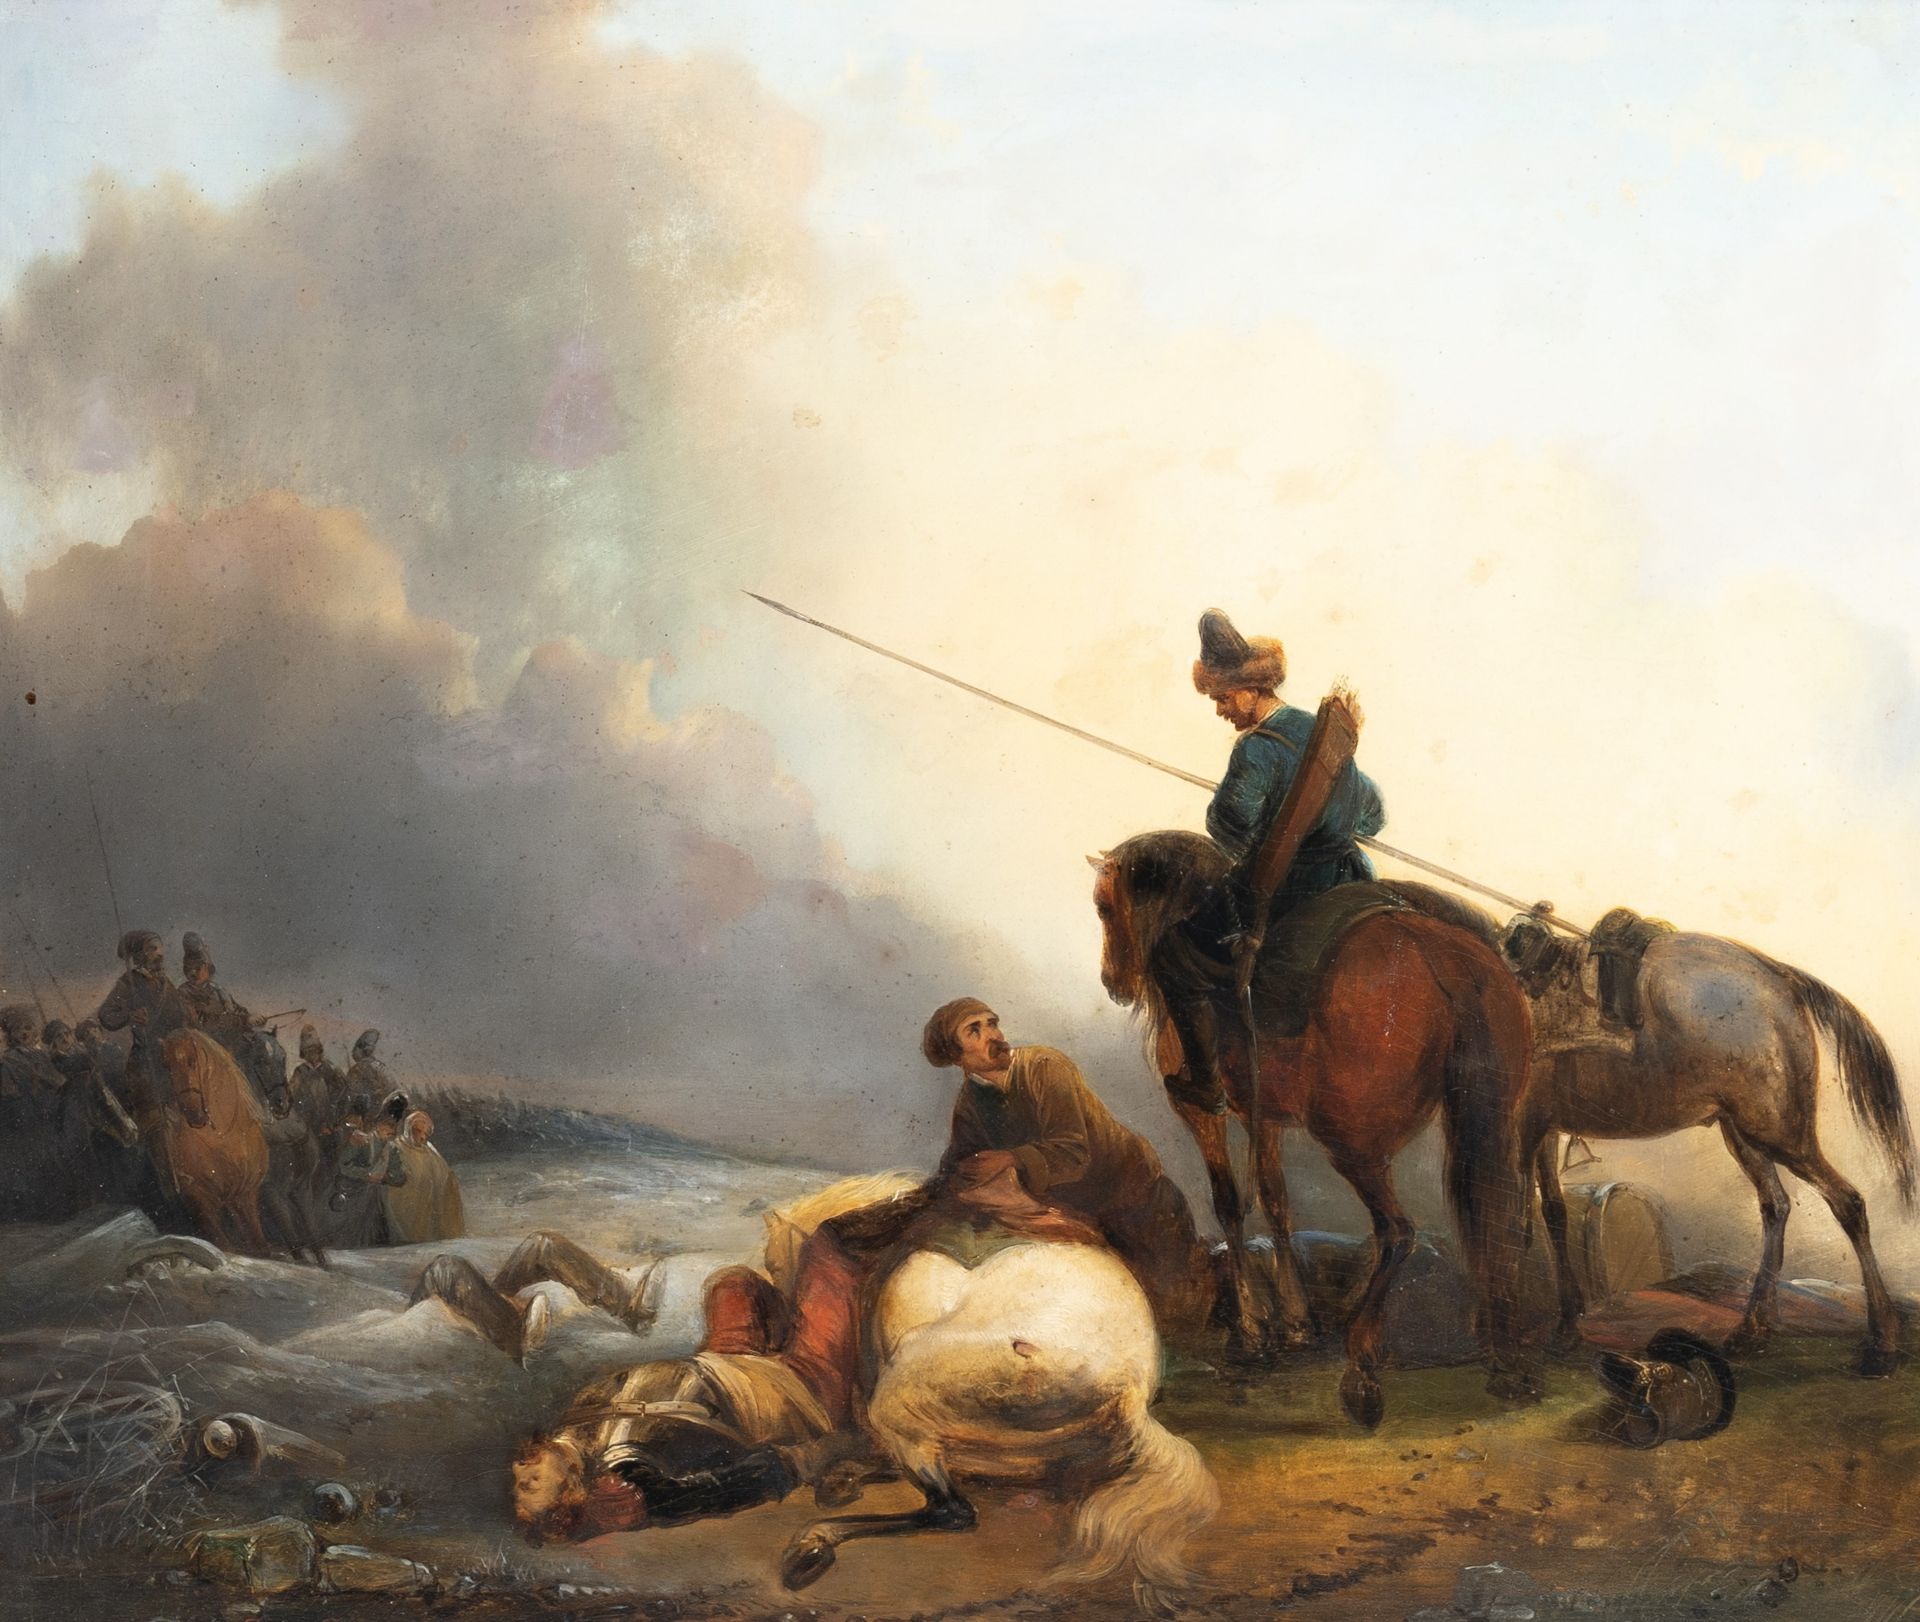 Joseph Jacobs (1806-1856): The end of the battle, oil on panel, dated 1843